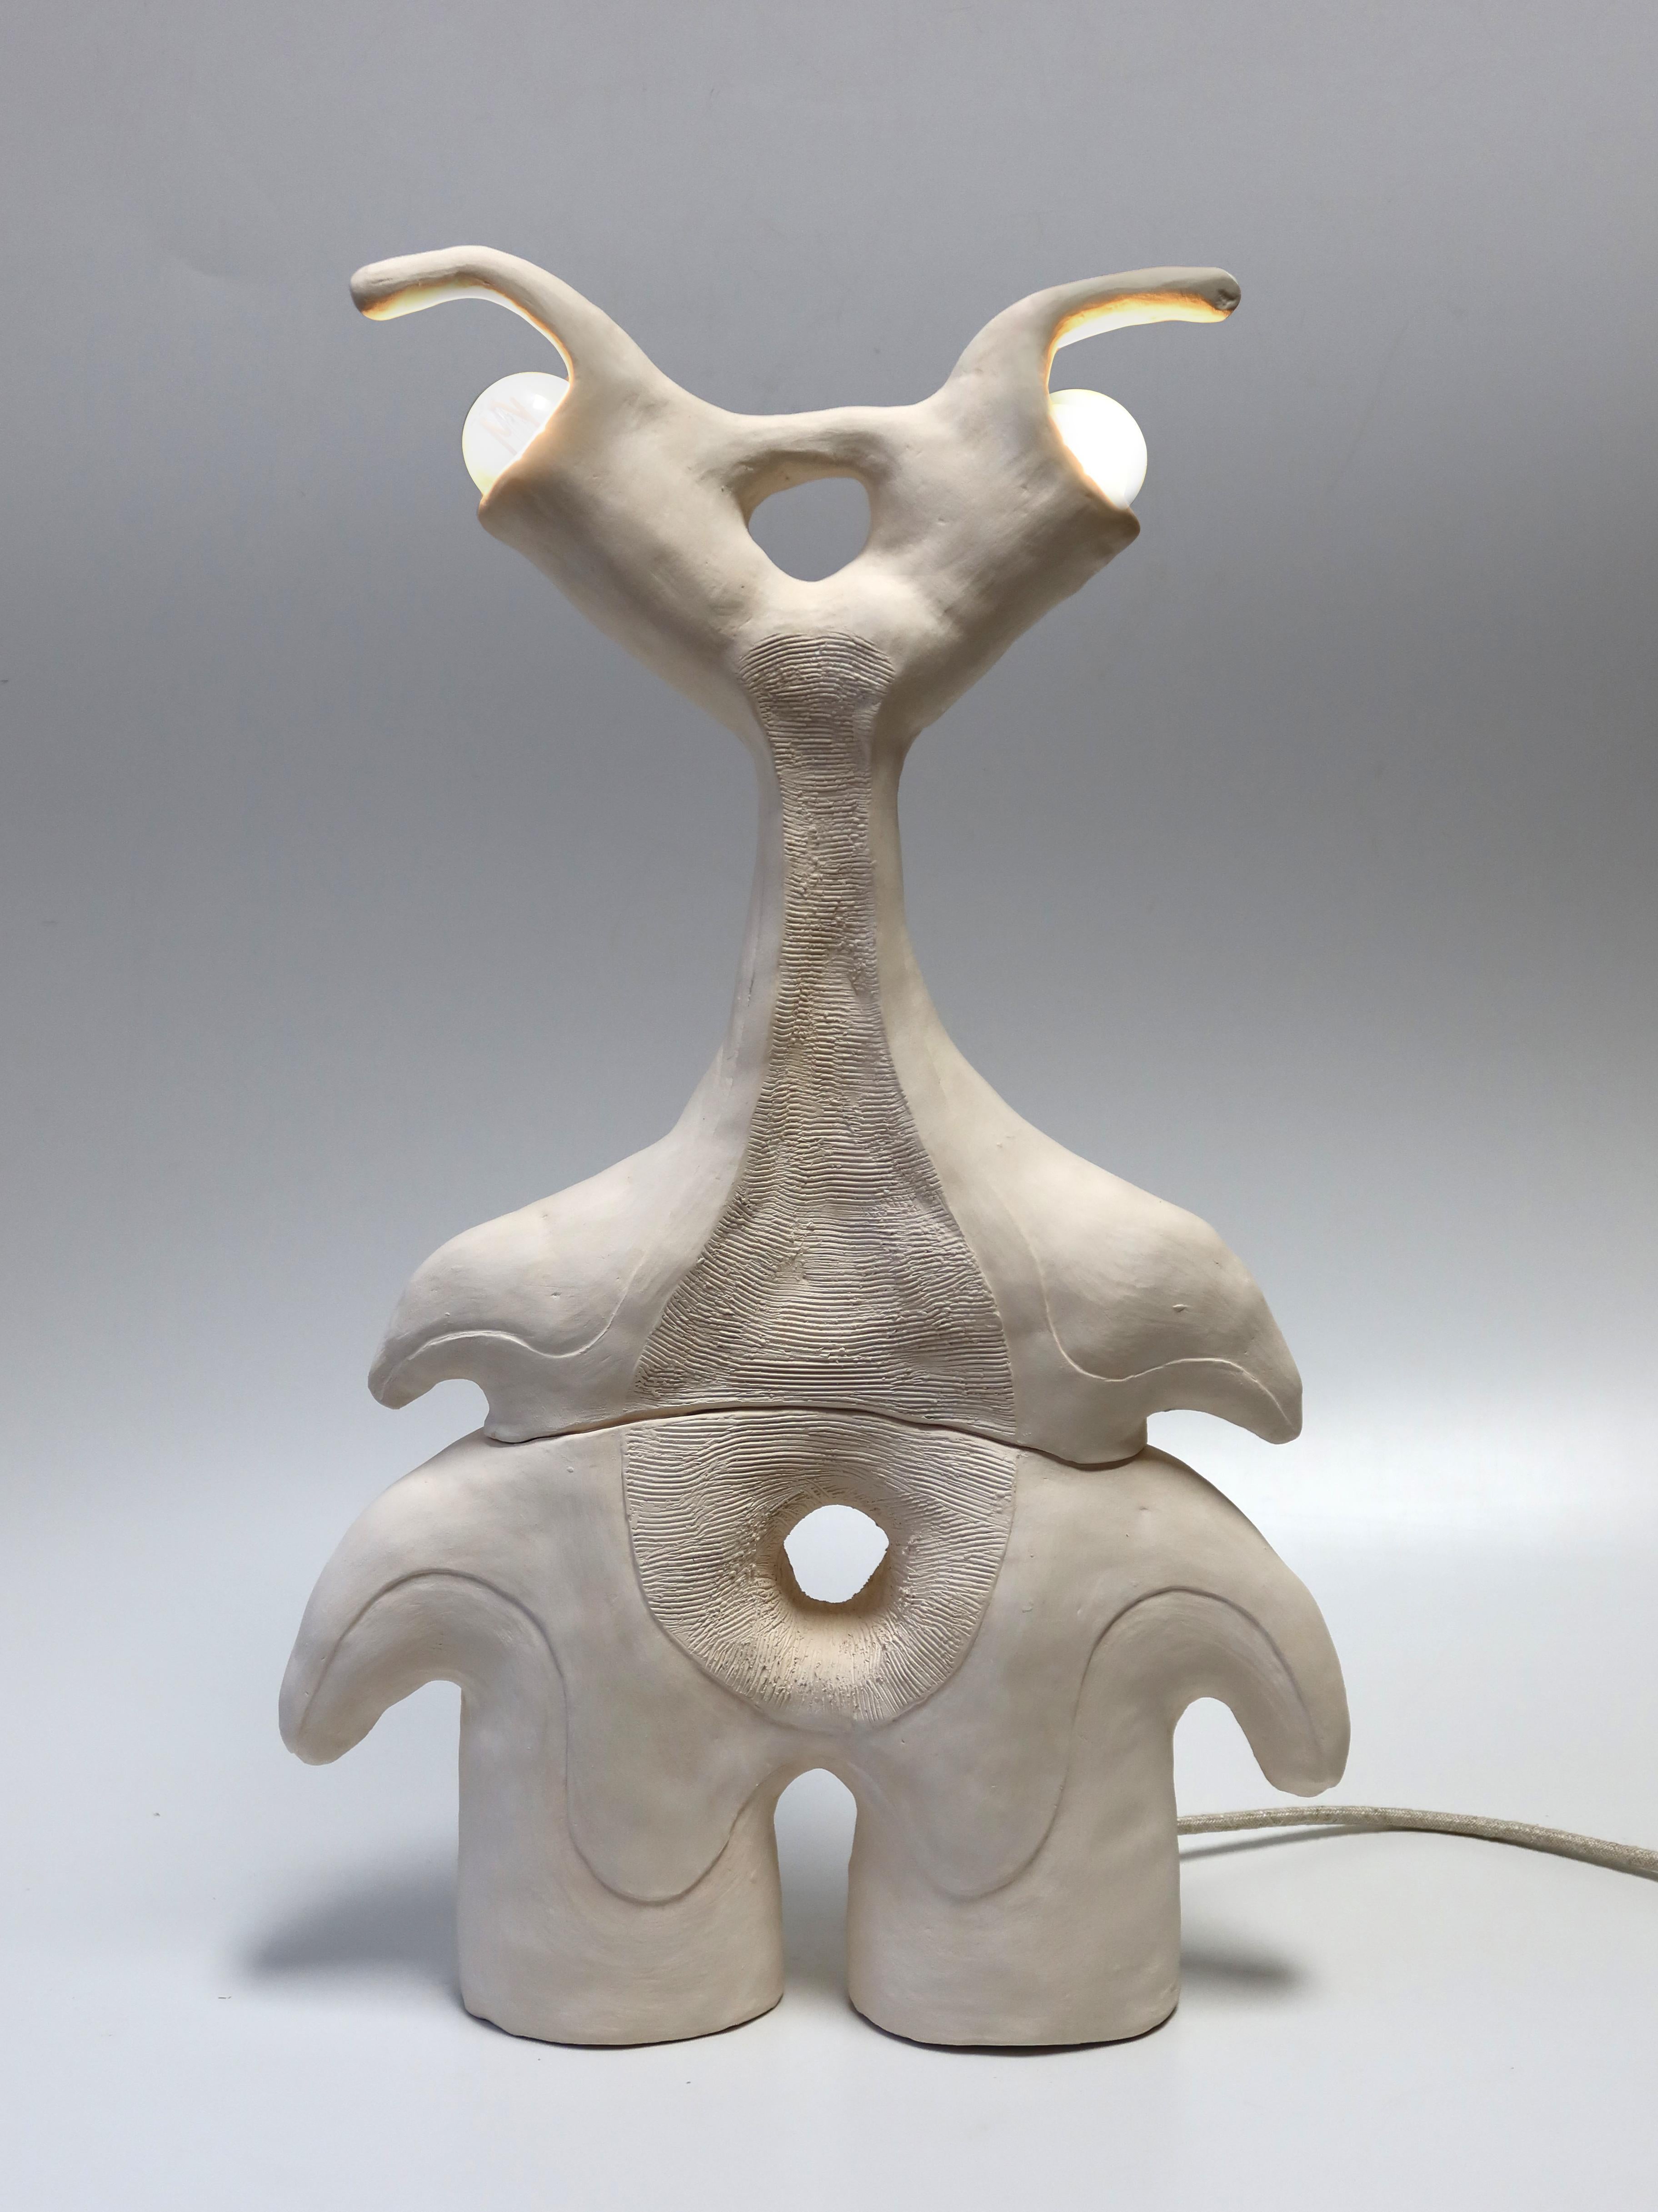 Jan Ernst is a multidisciplinary designer specializing in functional art and spatial design using clay as his main medium. The work is driven by his fascination with natural structures such as corals, fungi, and rock formations. His organic